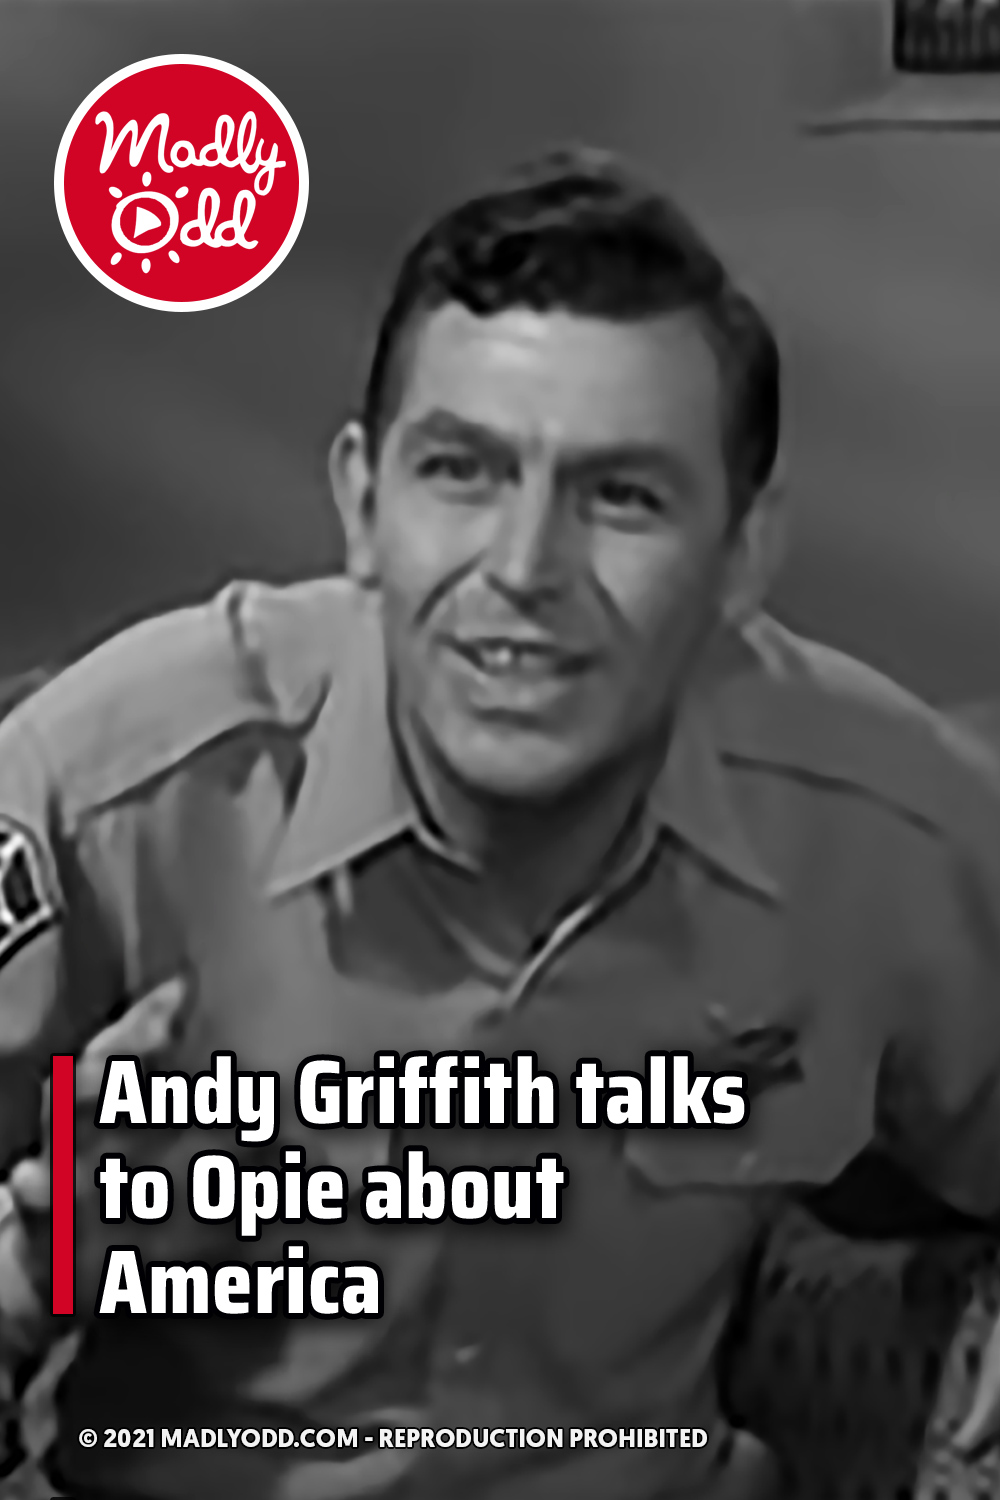 Andy Griffith talks to Opie about America